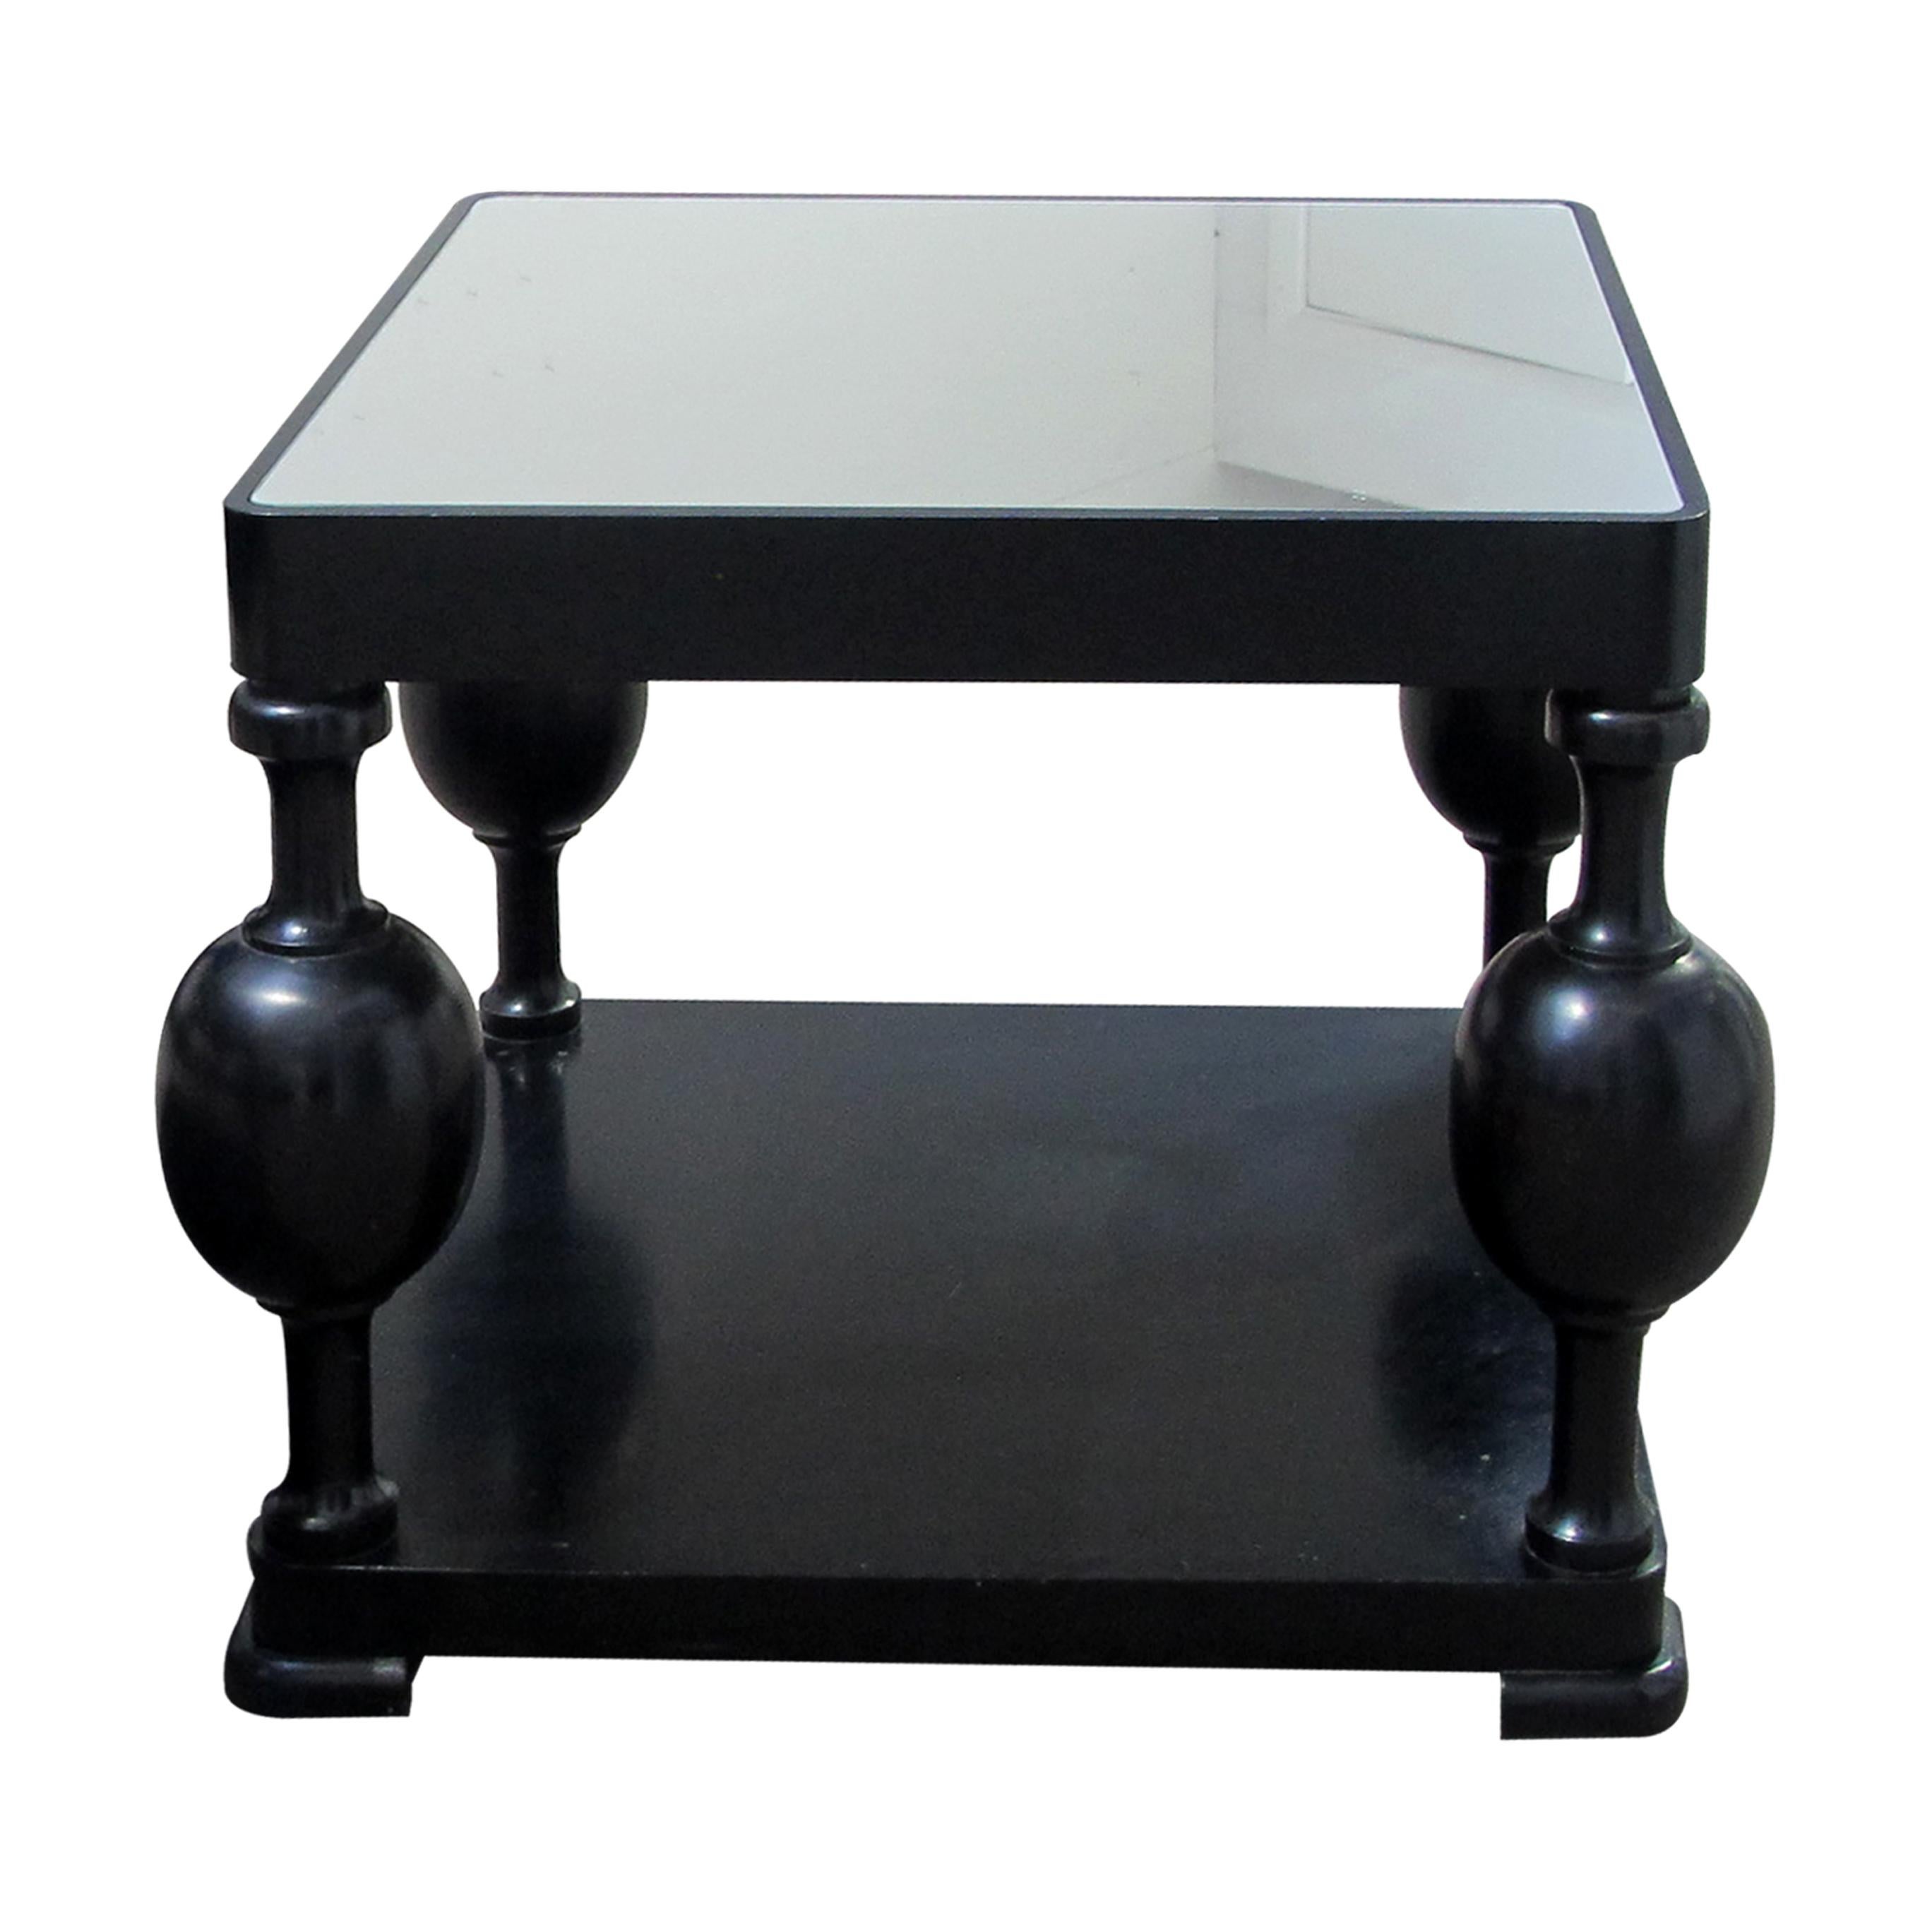 Early 20th Century Art Deco Swedish Set of Two Side Tables with Mirrored Tops & Ebonized Birch Wood